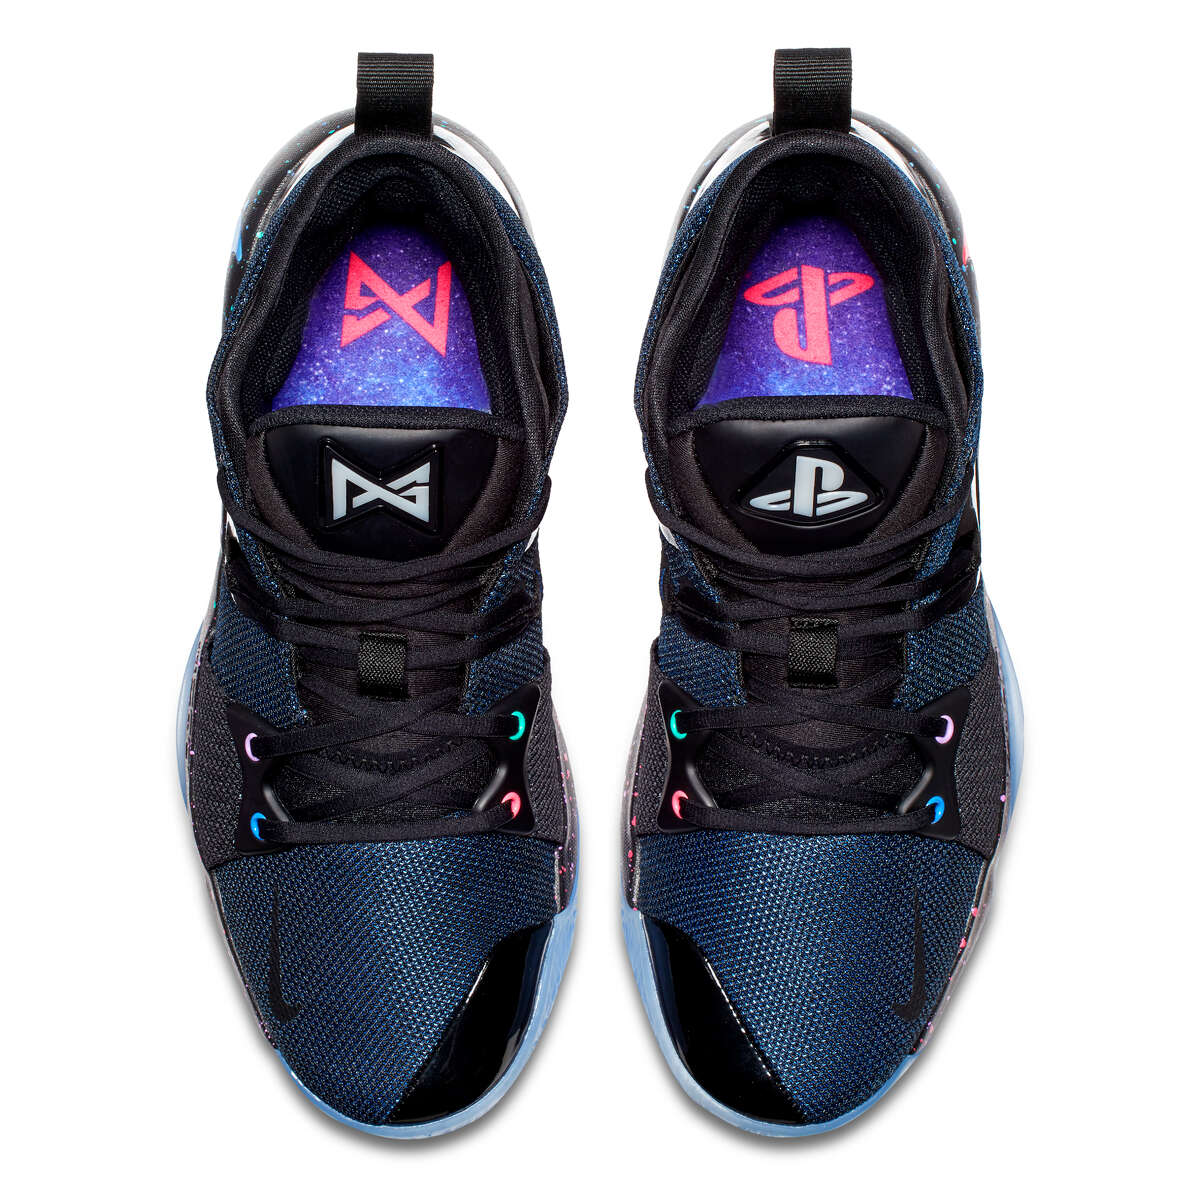 Check out Paul insanely cool PlayStation shoe